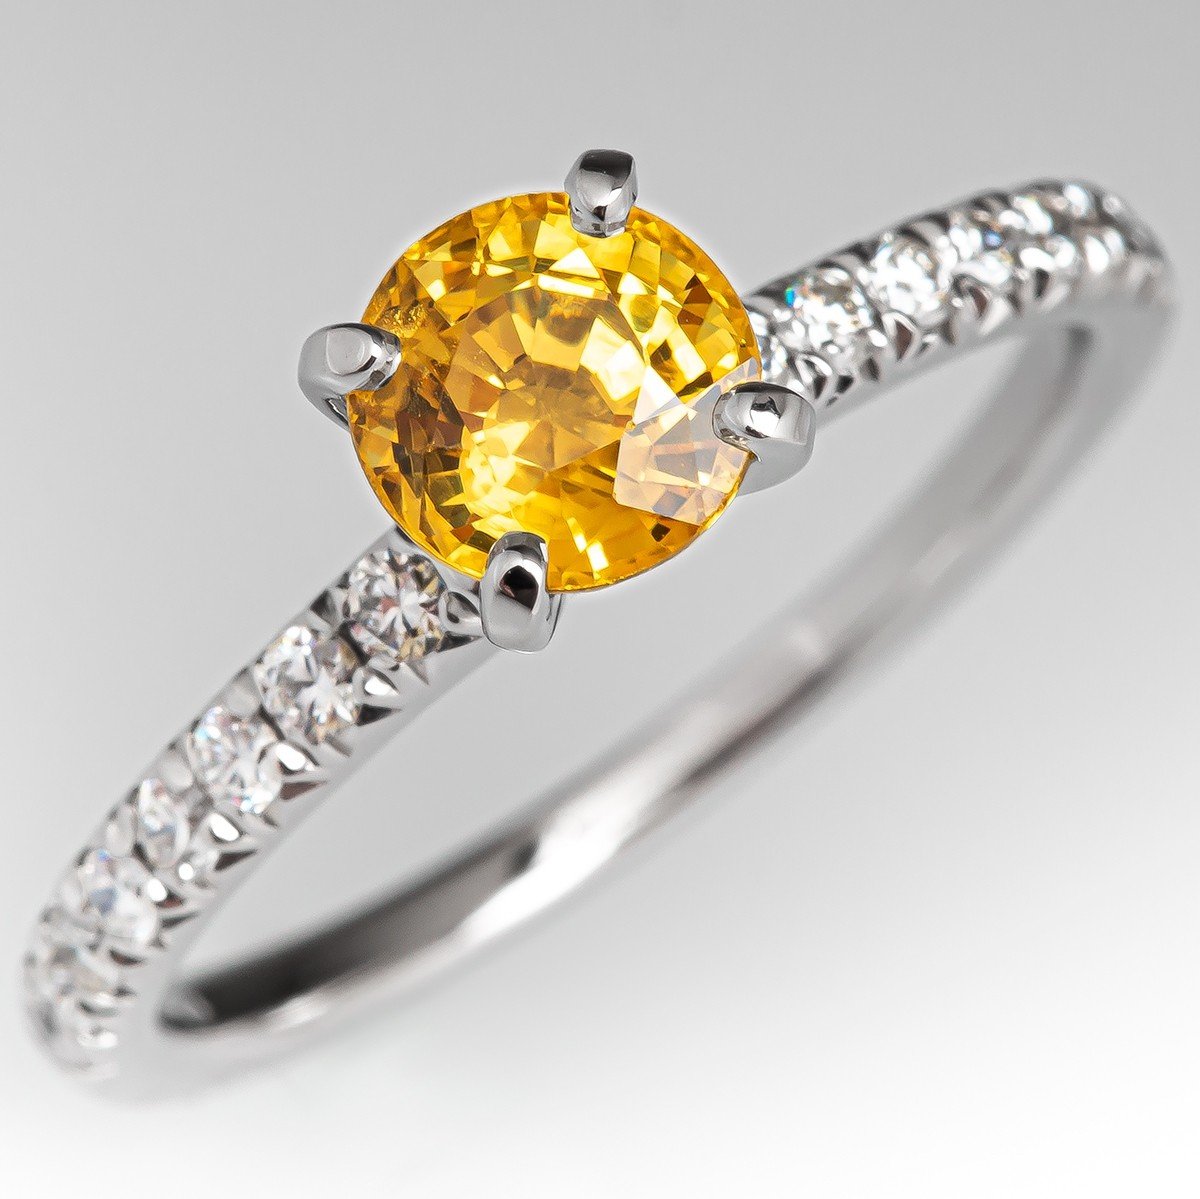 Buy Pukhraj stone ring Natural certified gemstone yellow sapphire gold  plated ring for men women Online - Get 45% Off